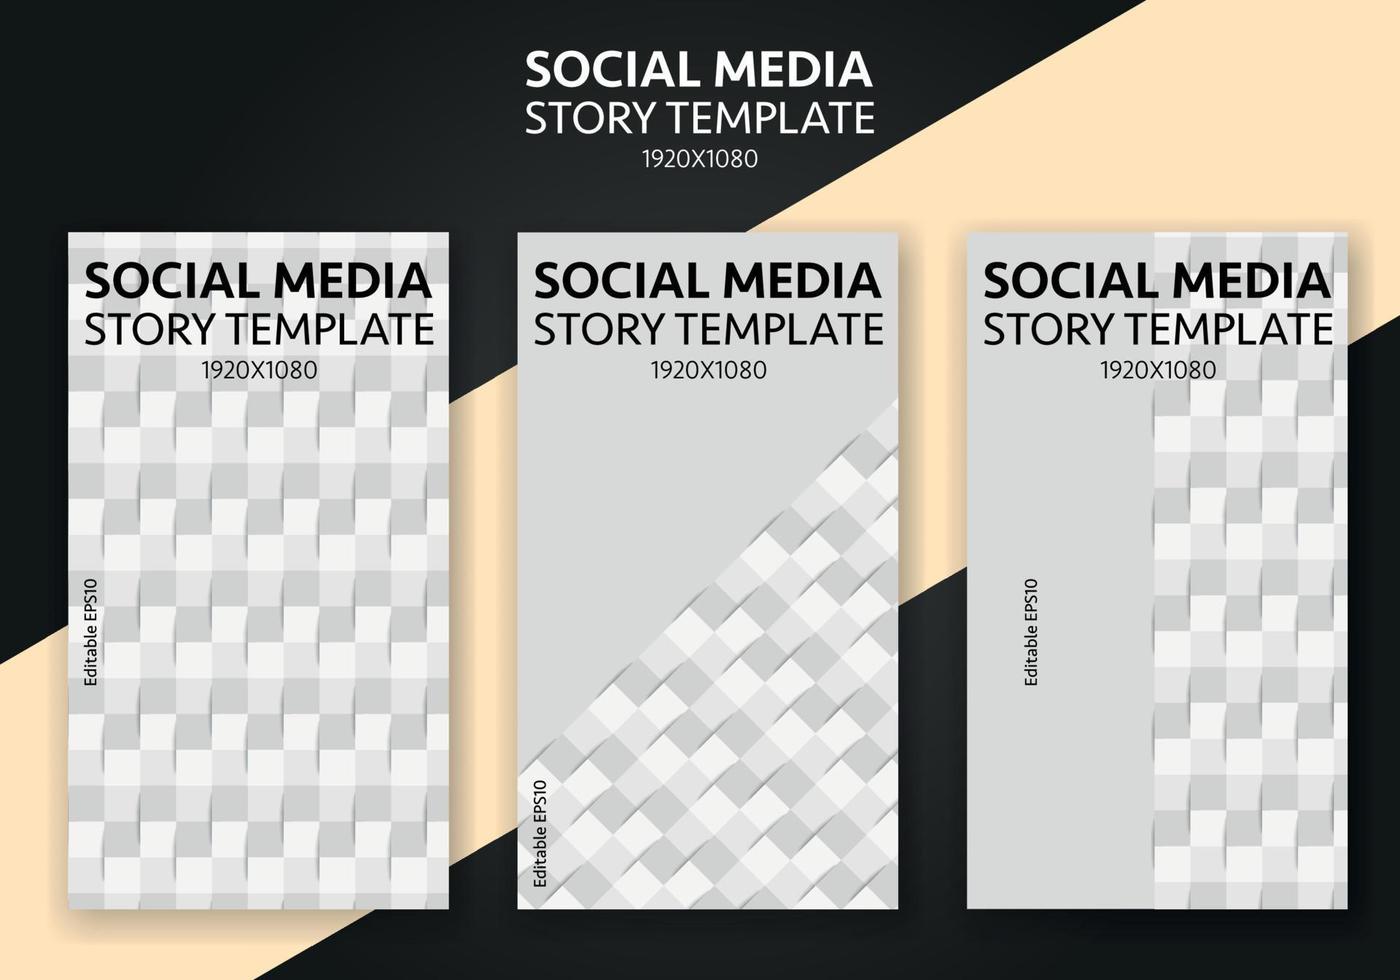 Abstract social media story template. Minimalistic social media vector story template.